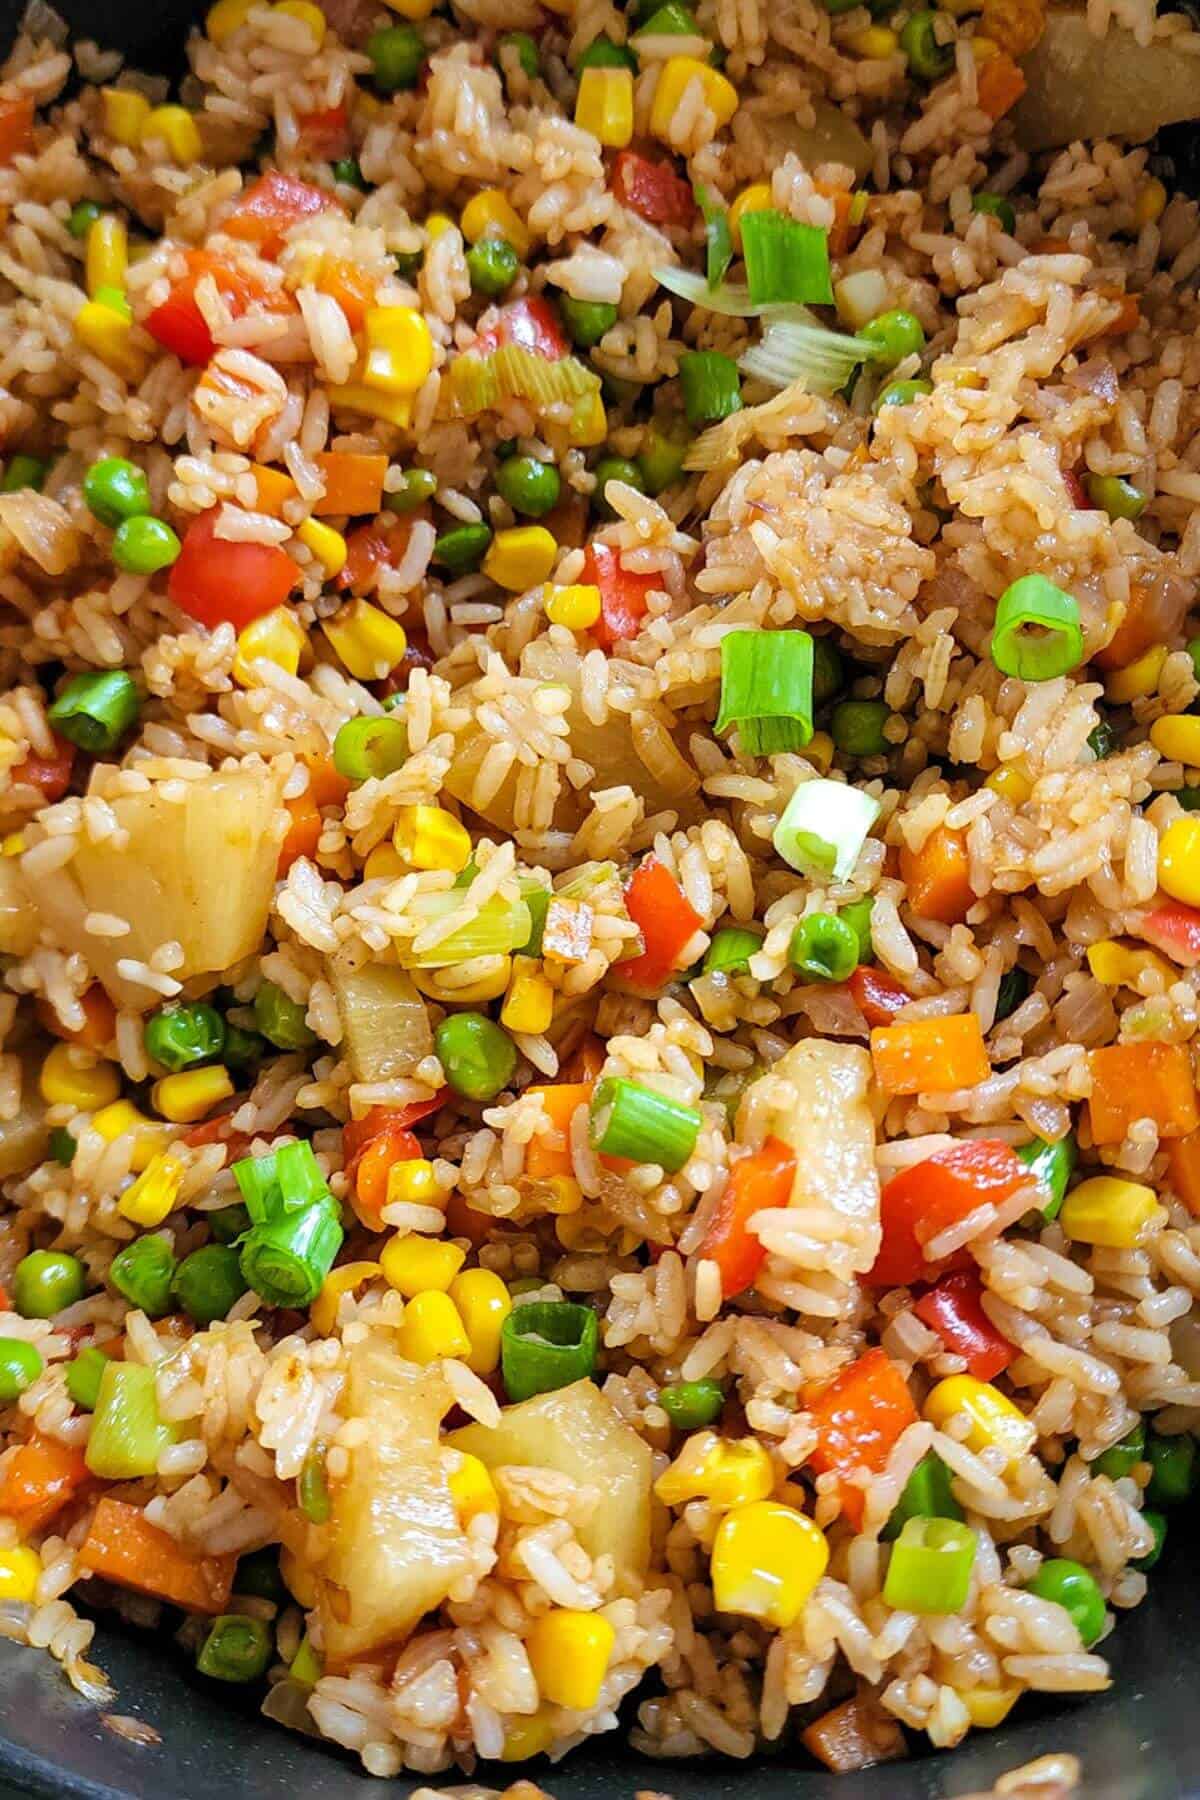 Pineapple fried rice with vegetables in a wok.